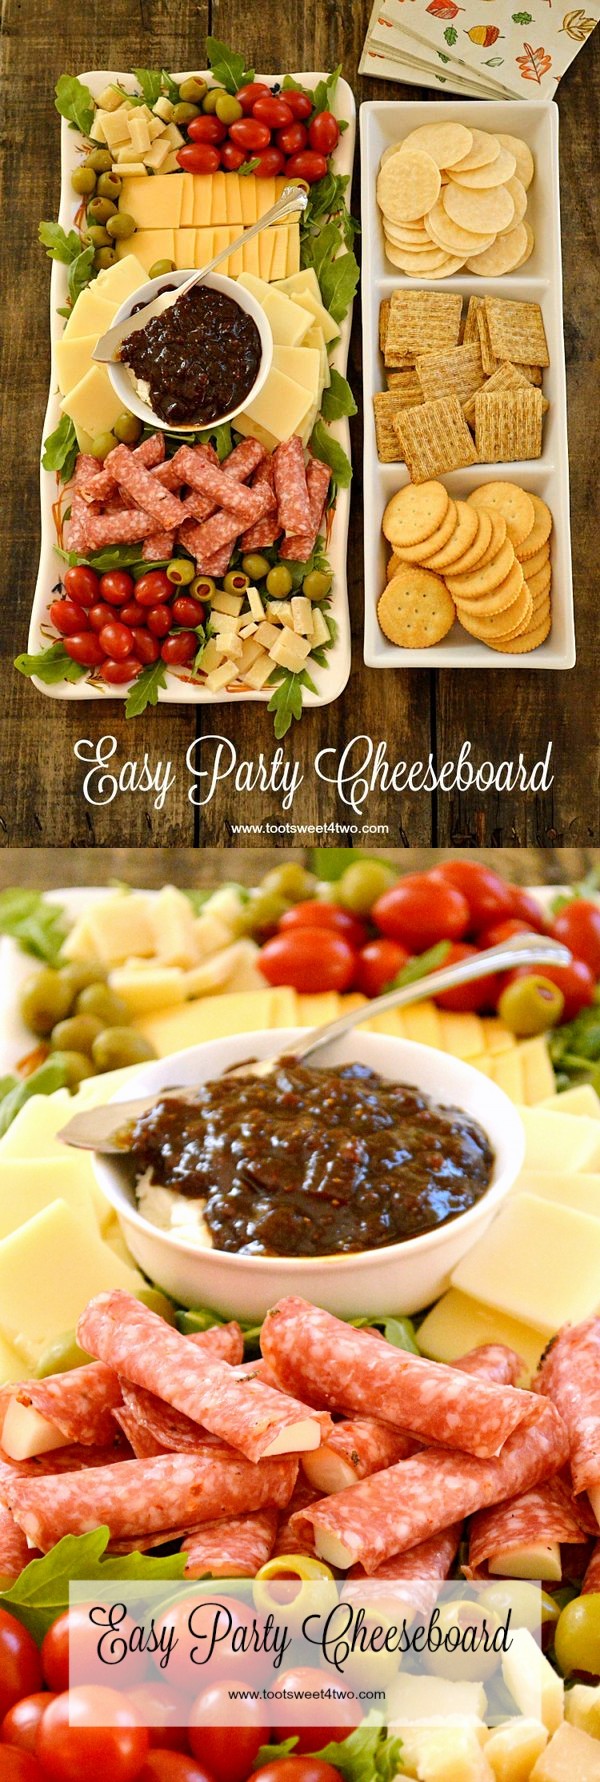 Easy Party Cheeseboard